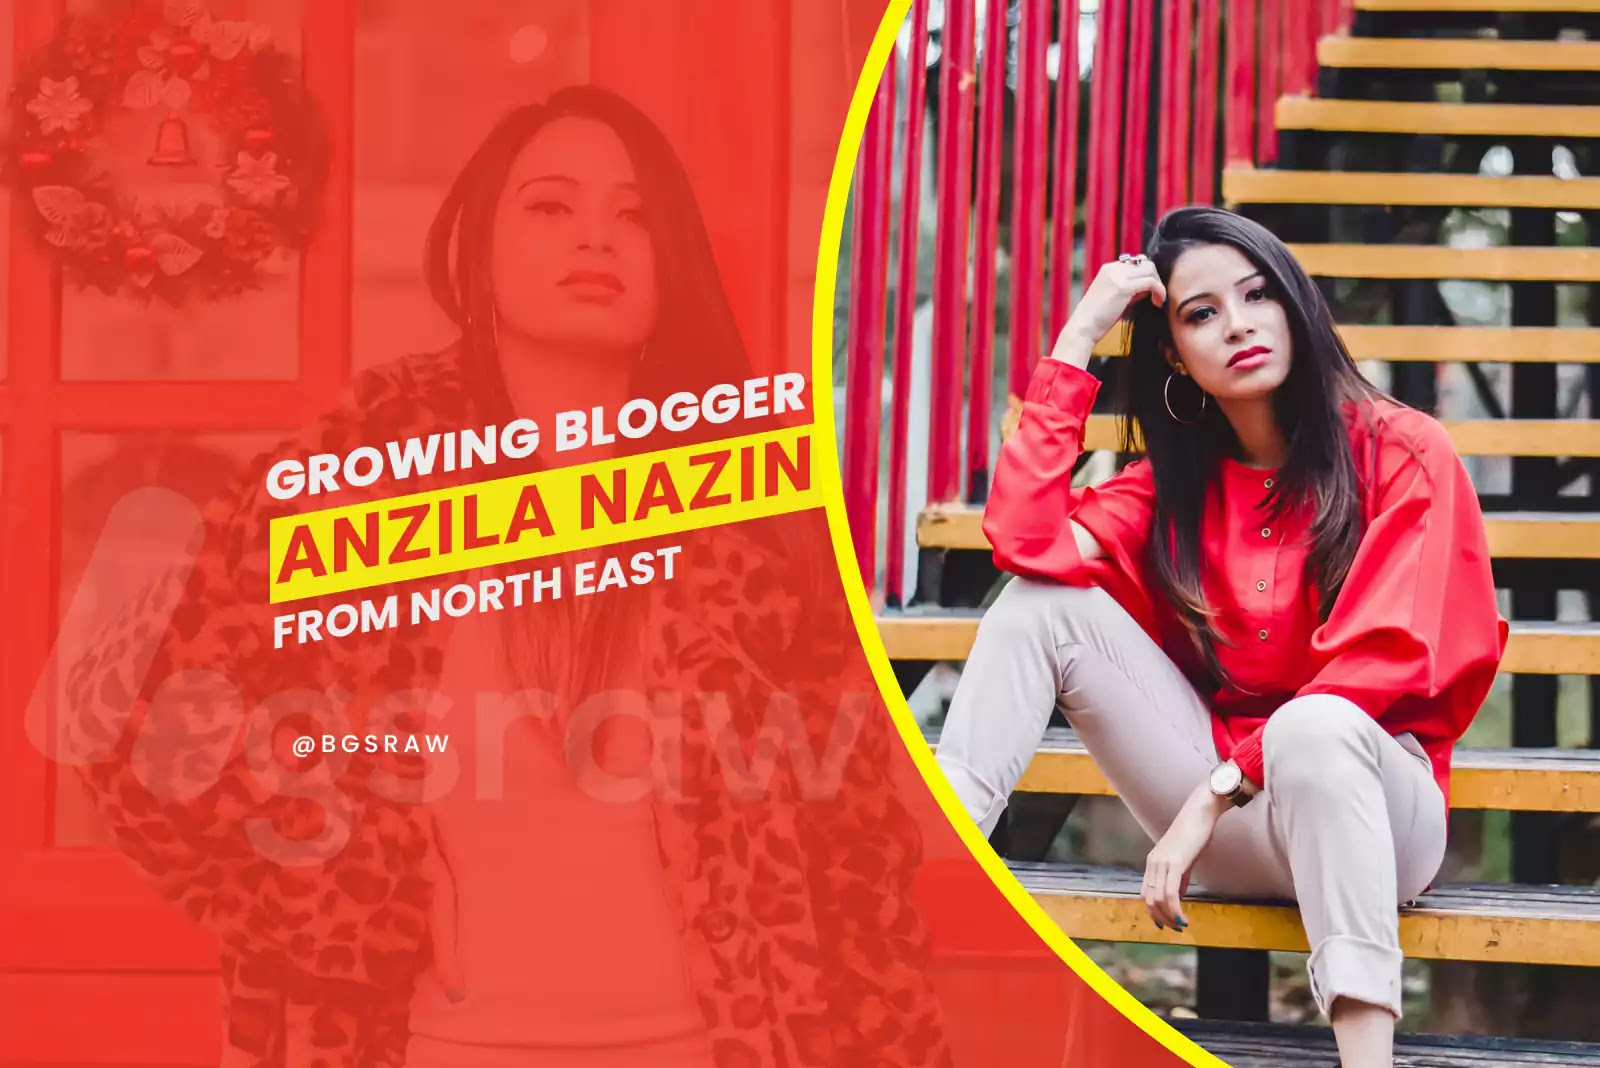 A Growing Popular Blogger in the North East, Anzila Naznin